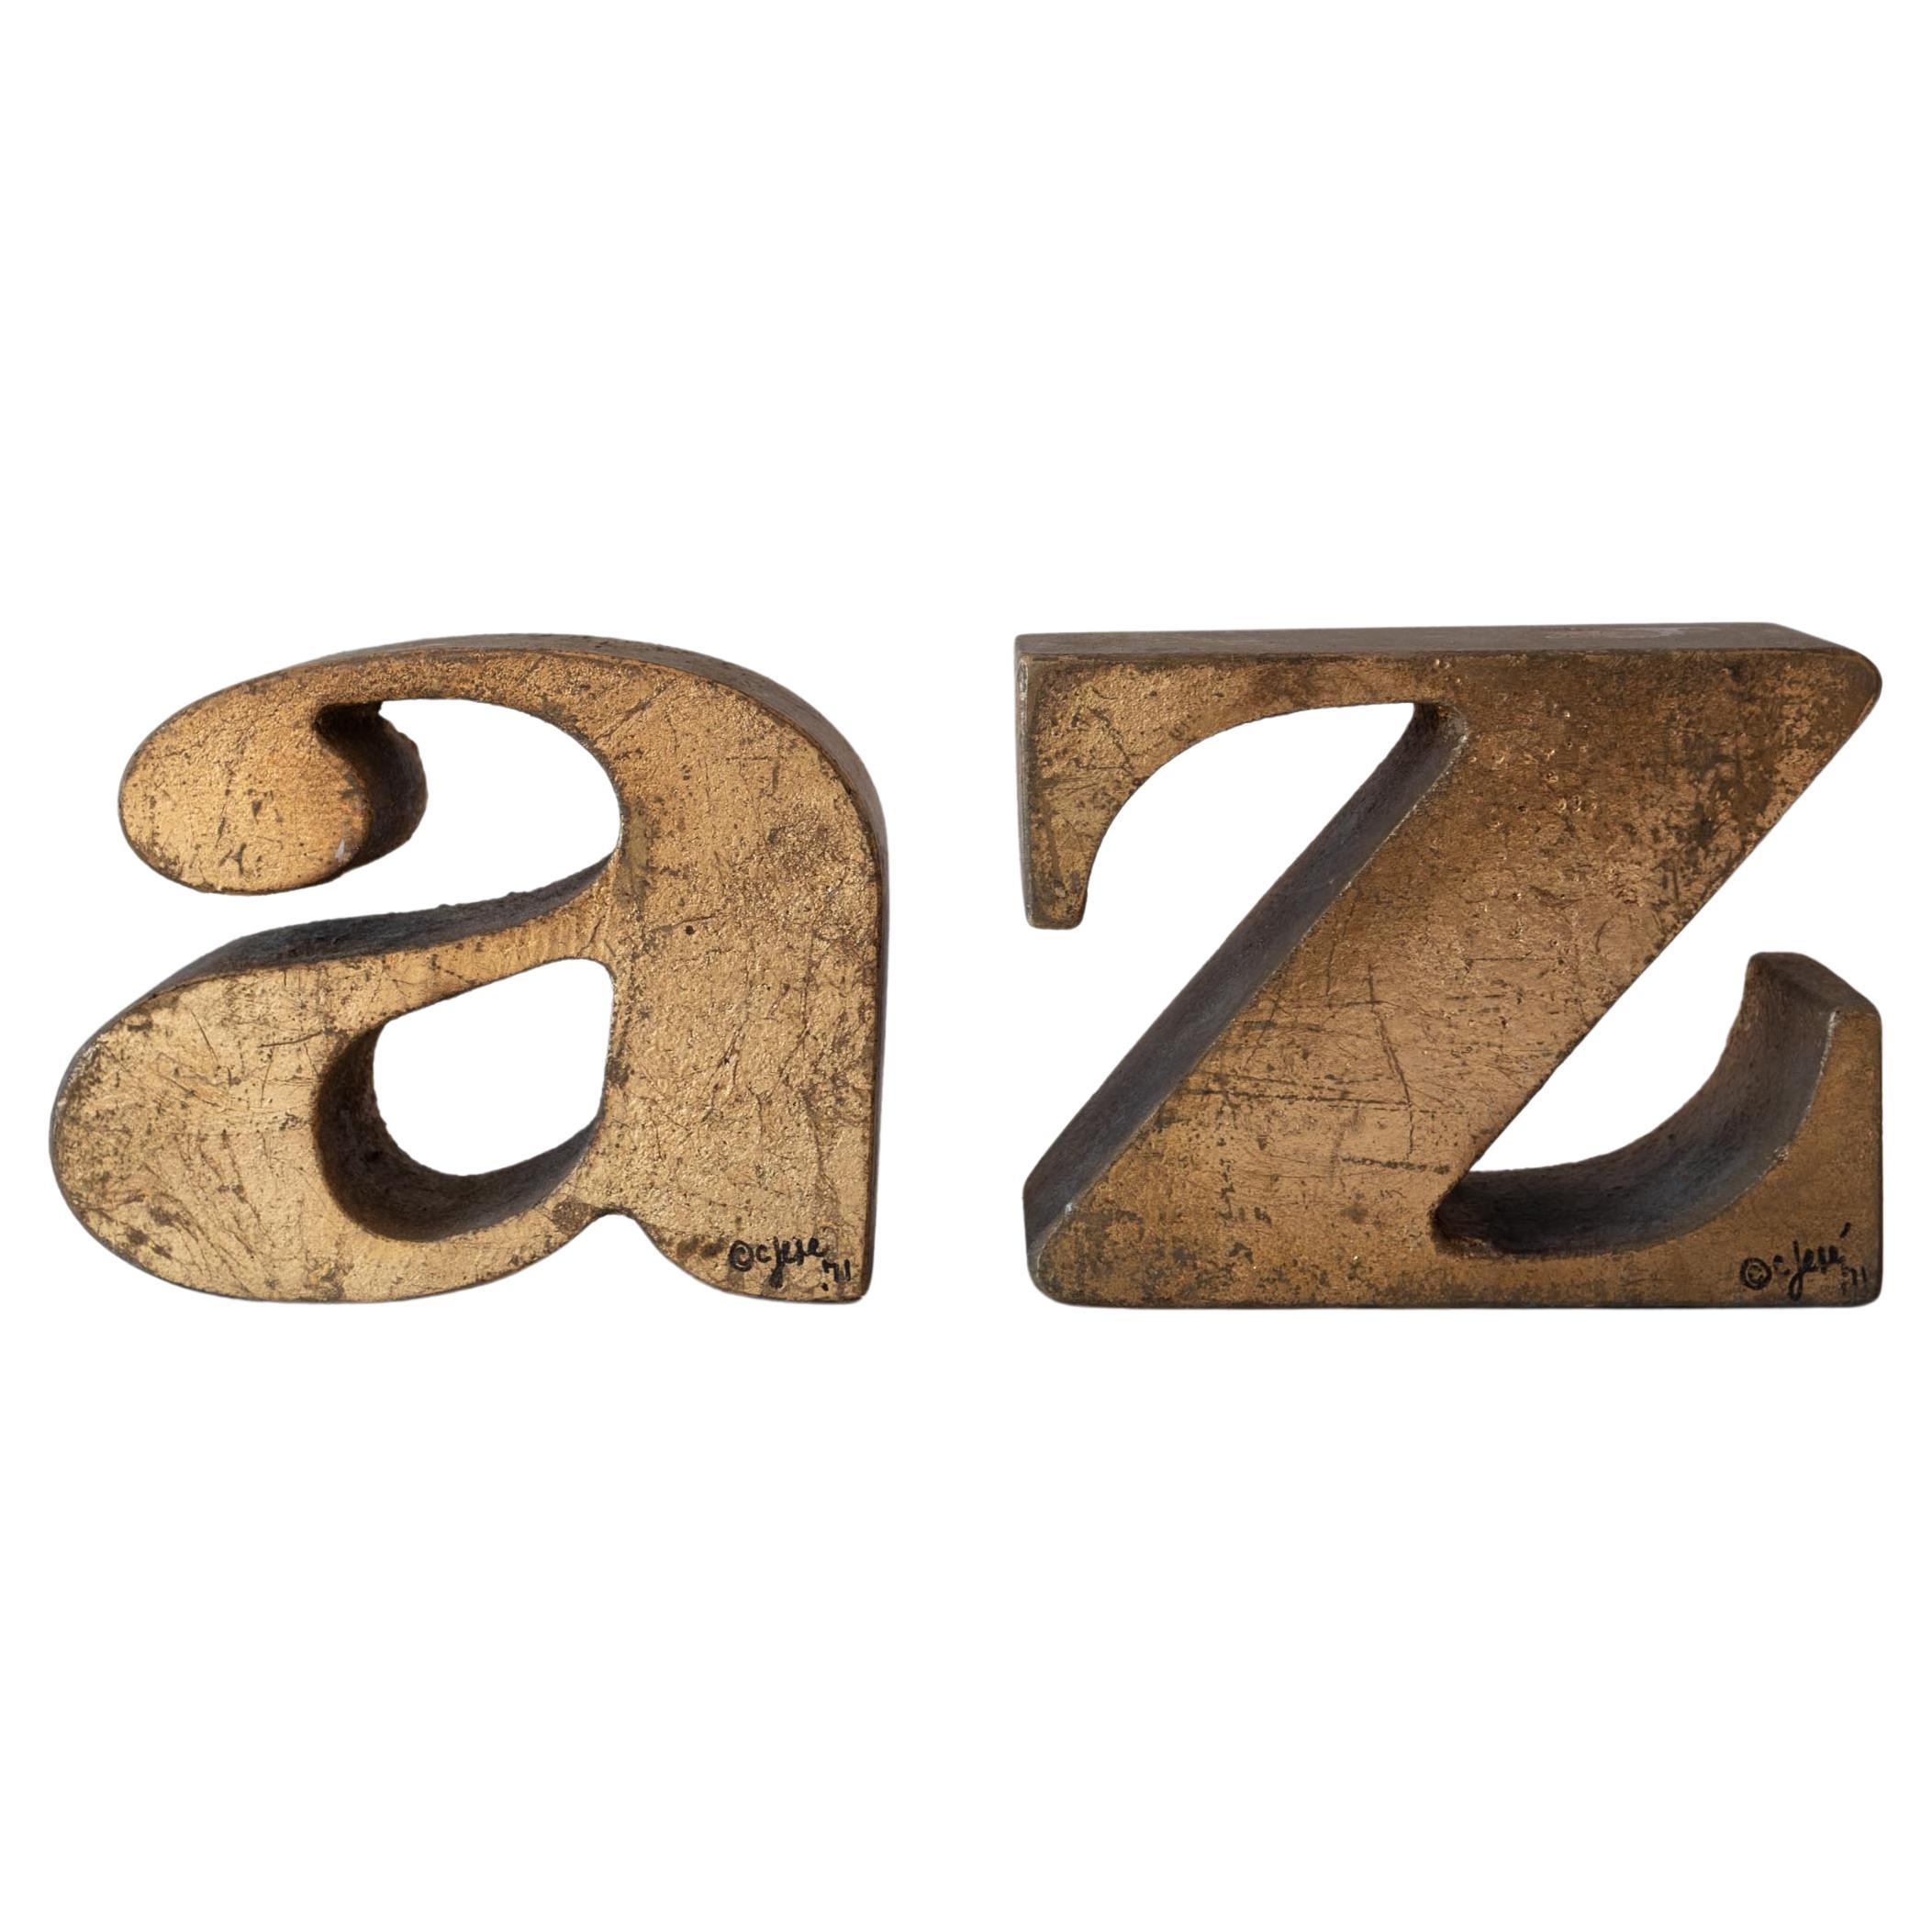 Pair of "A to Z" Bookends by Curtis Jere Signed & Dated 1971 in Gold Leaf Finish